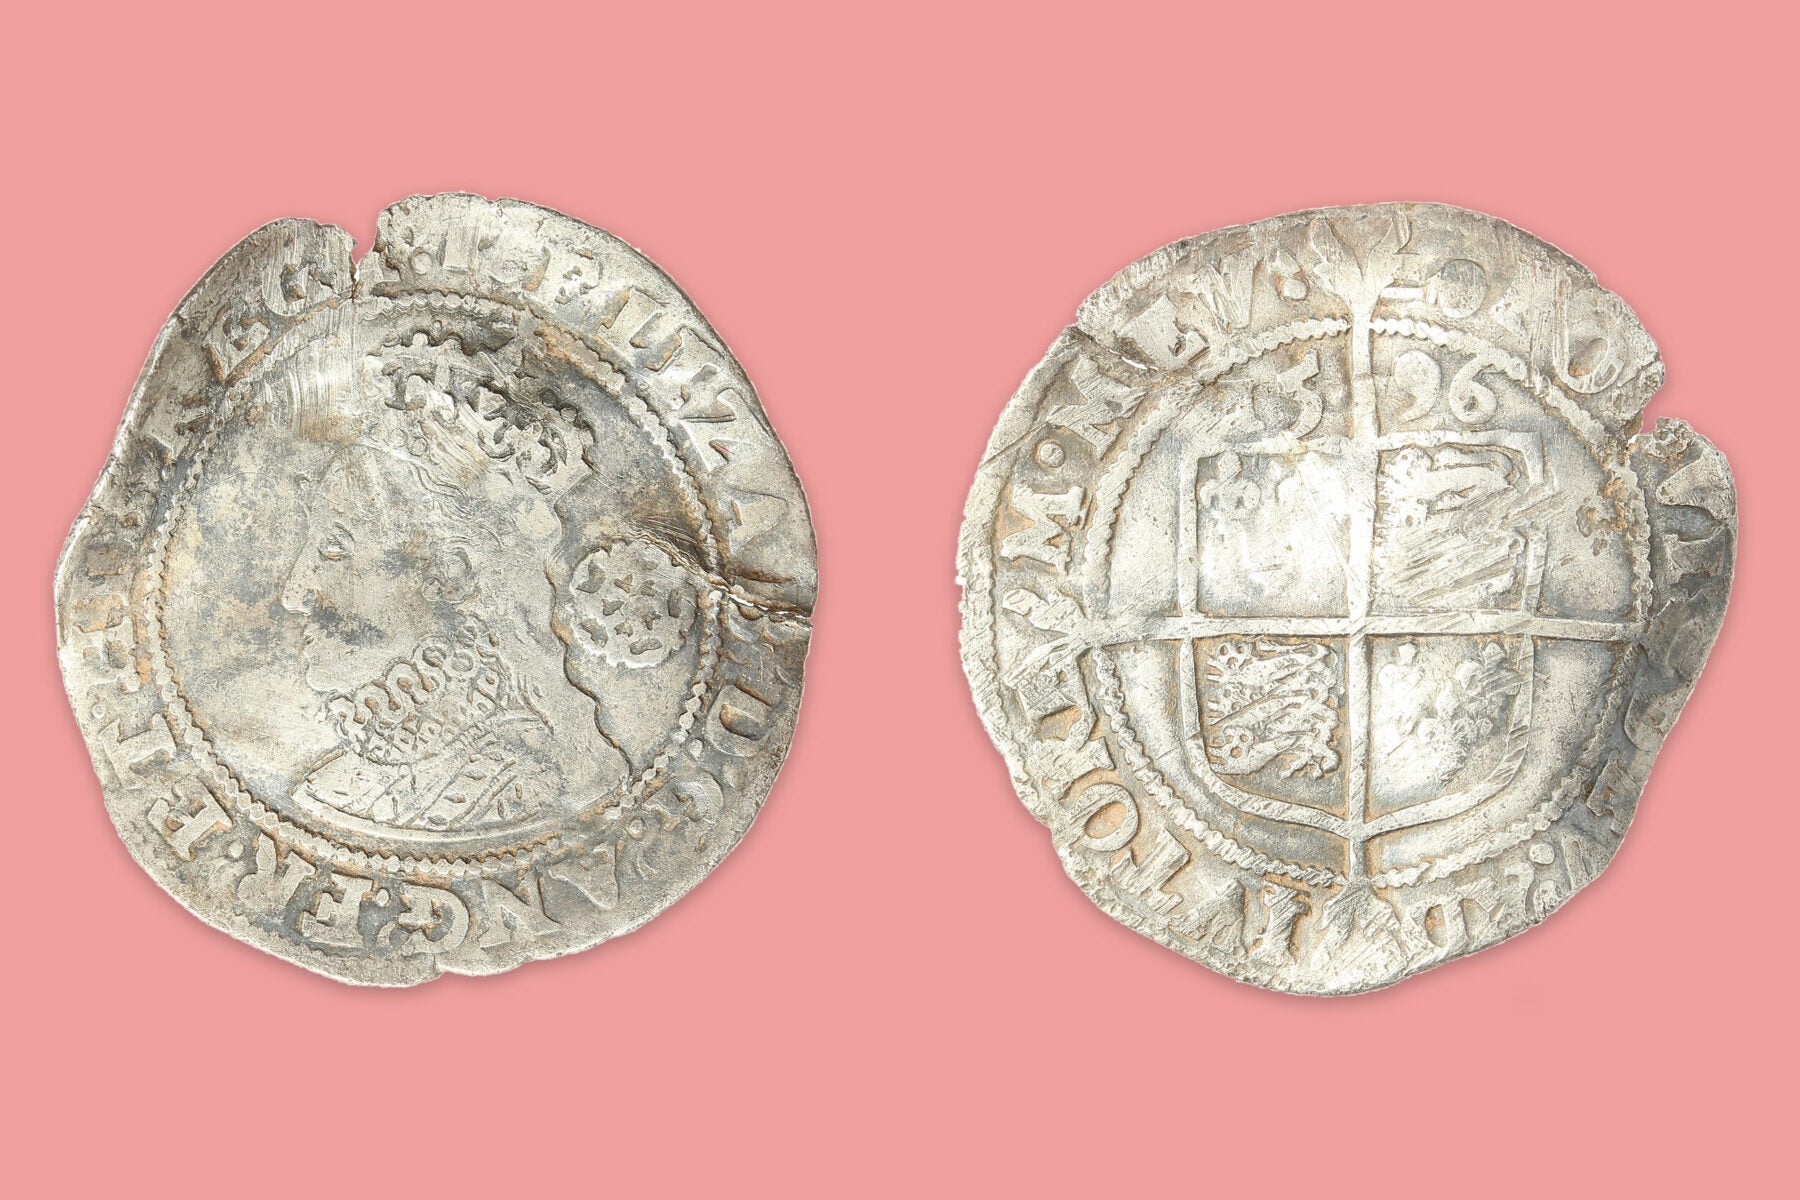 Medieval coin, sixpence of Elizabeth I dating to AD 1596